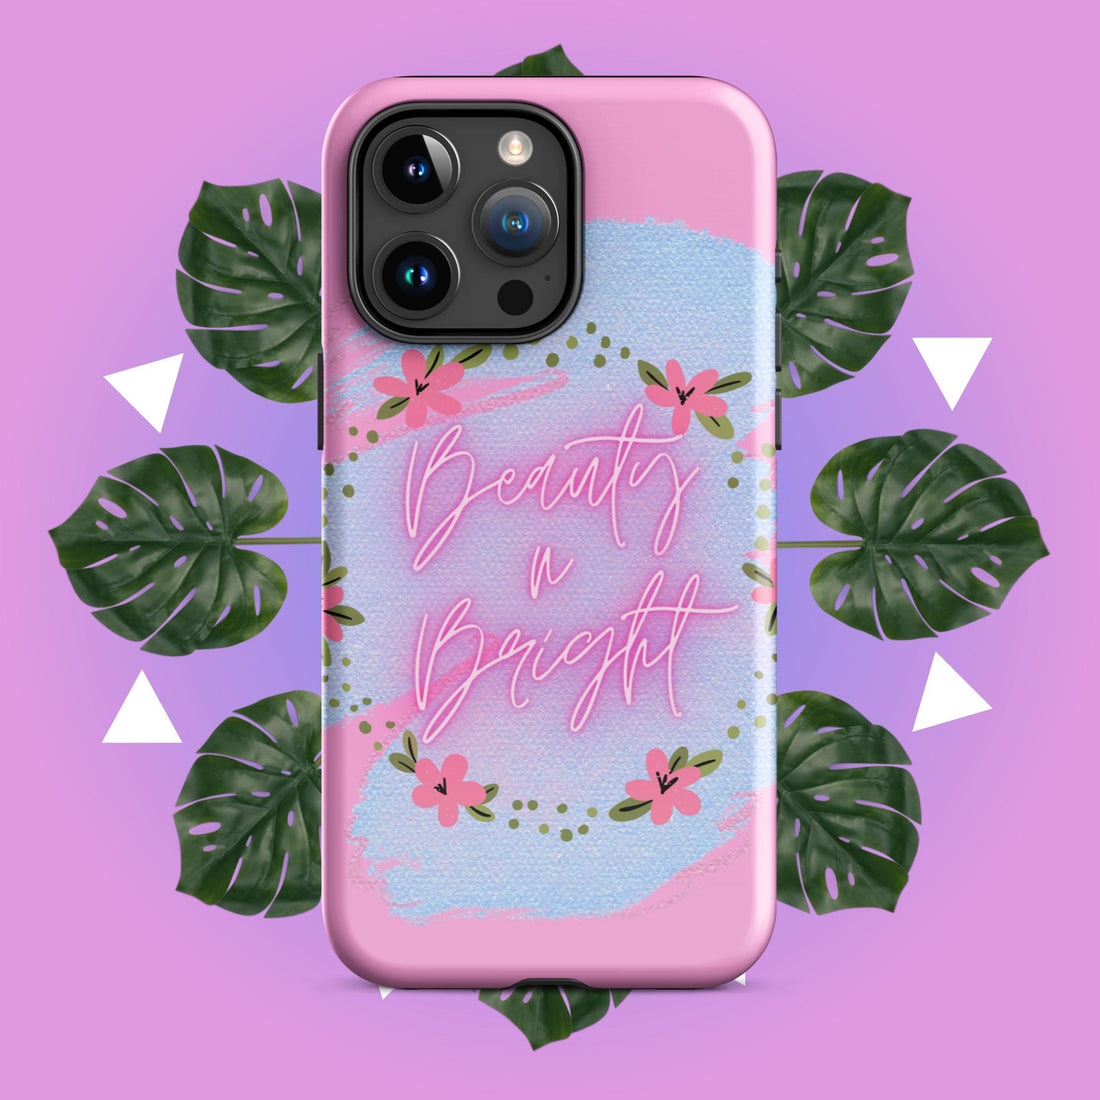 Shockproof Protective Iphone Case - Beauty n Bright, image, Iphone Case